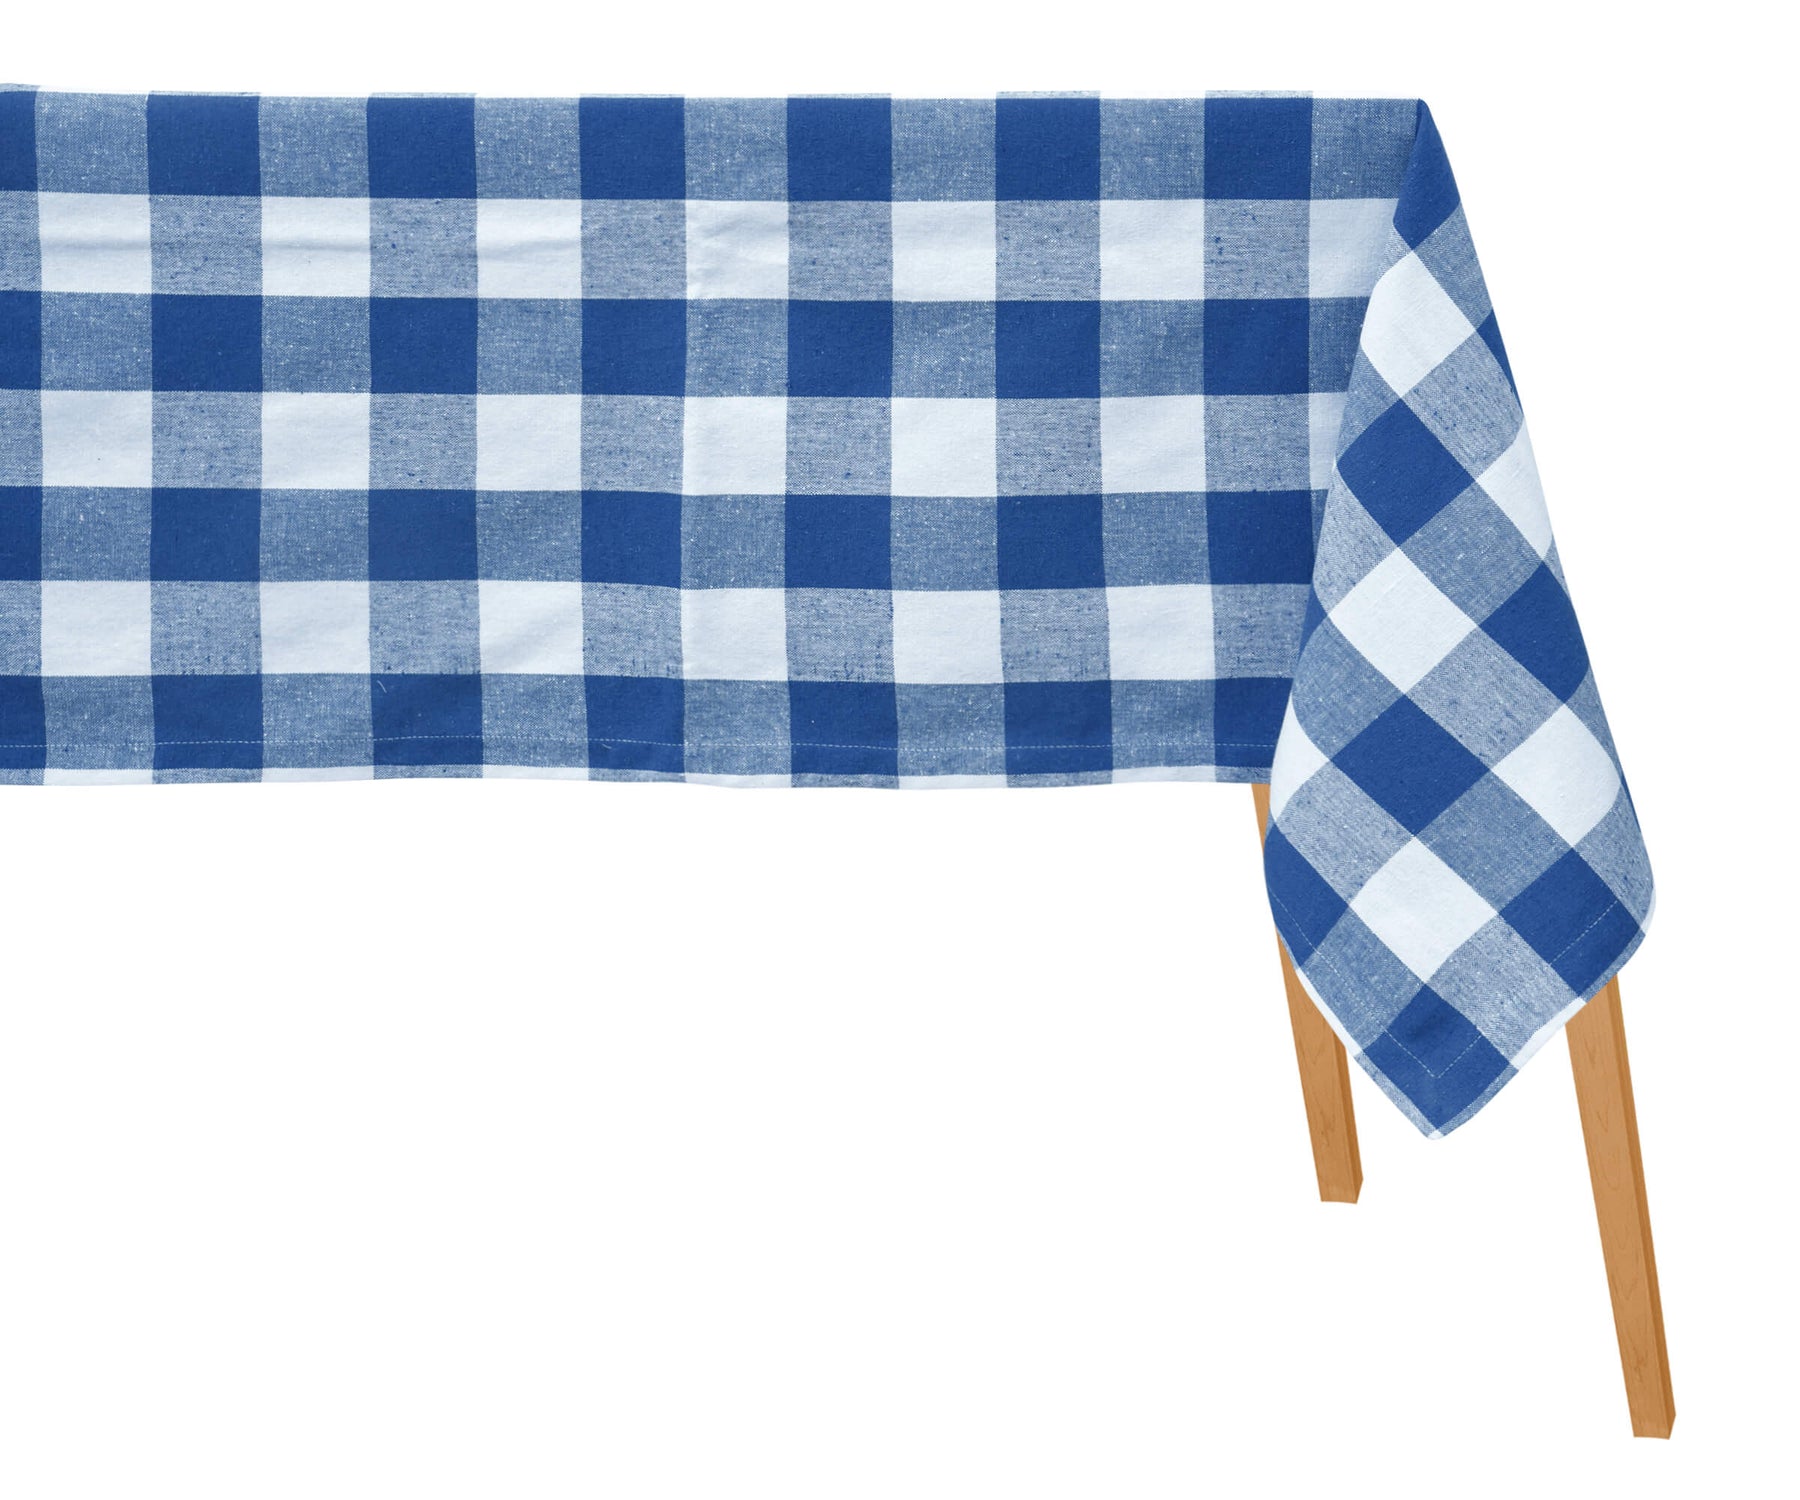 The cotton checkered tablecloth can be used for everyday purposes without any hassle.